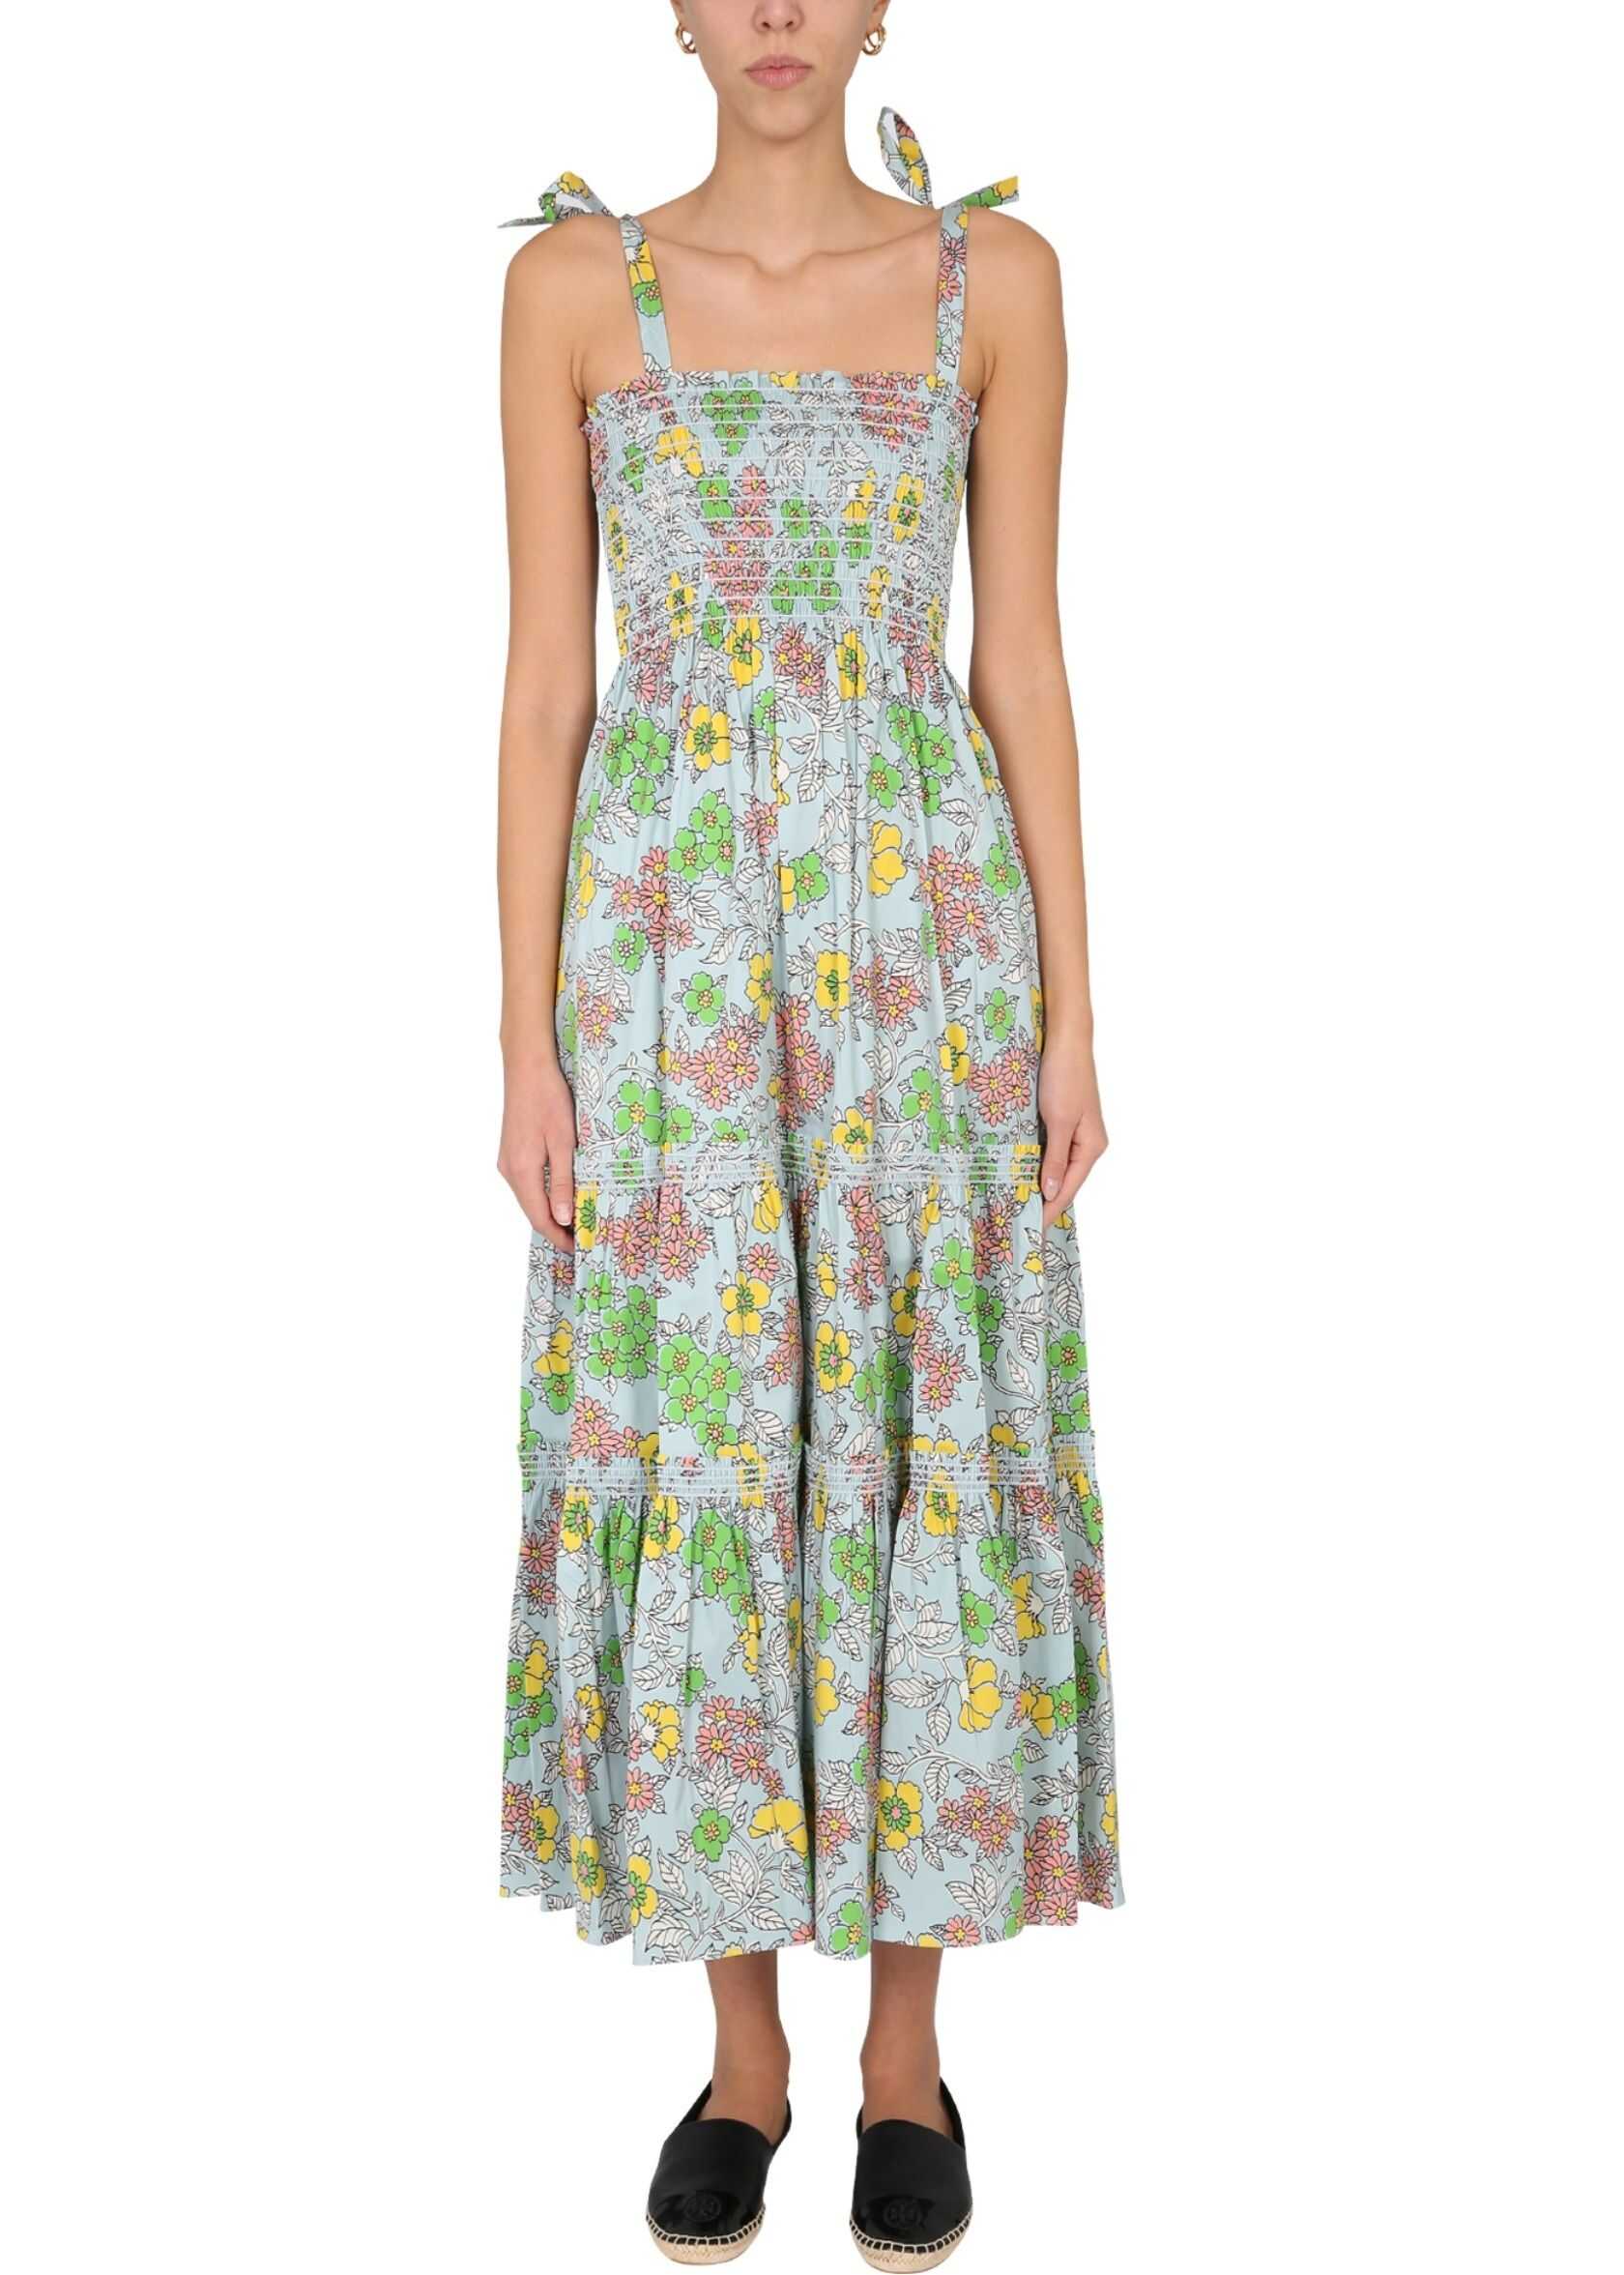 Tory Burch Dress With Floral Print BLUE